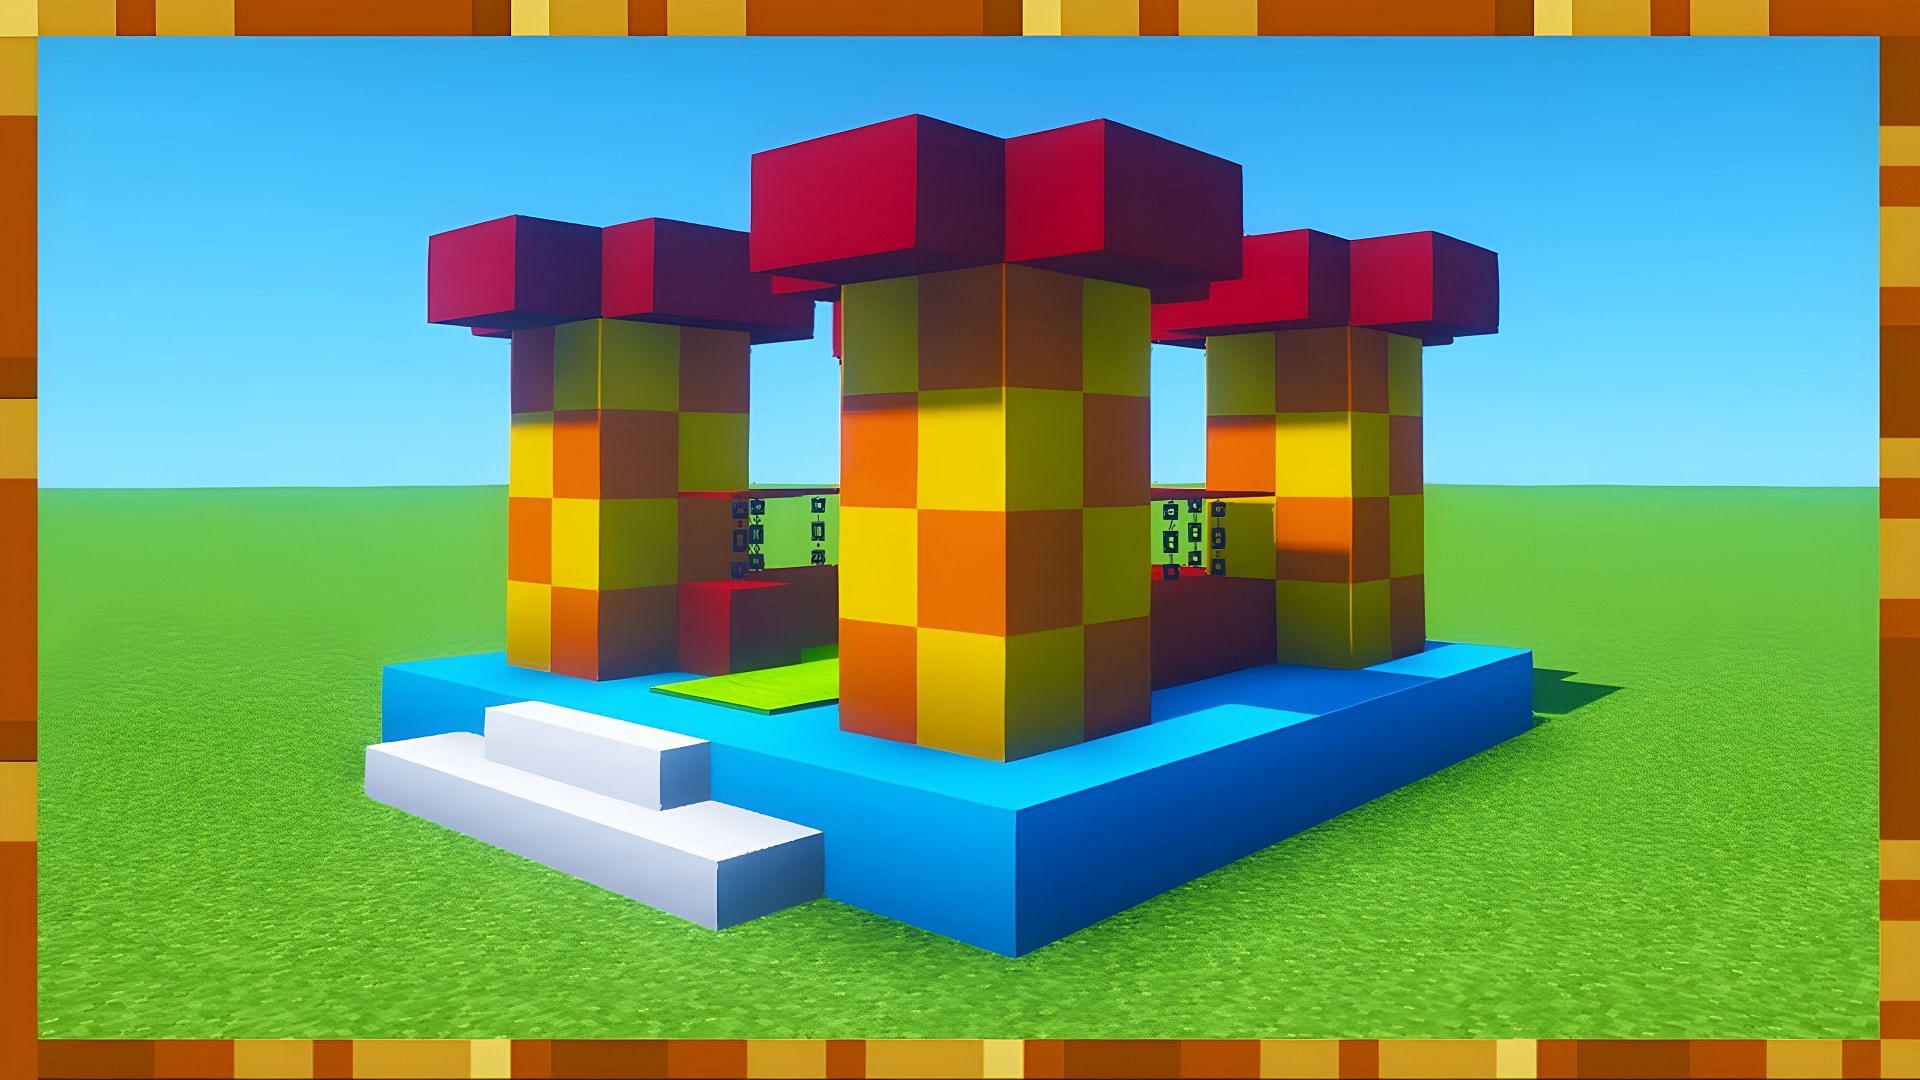 Bounce houses are fun to use in Minecraft (Image via Youtube/TSMC - Minecraft)